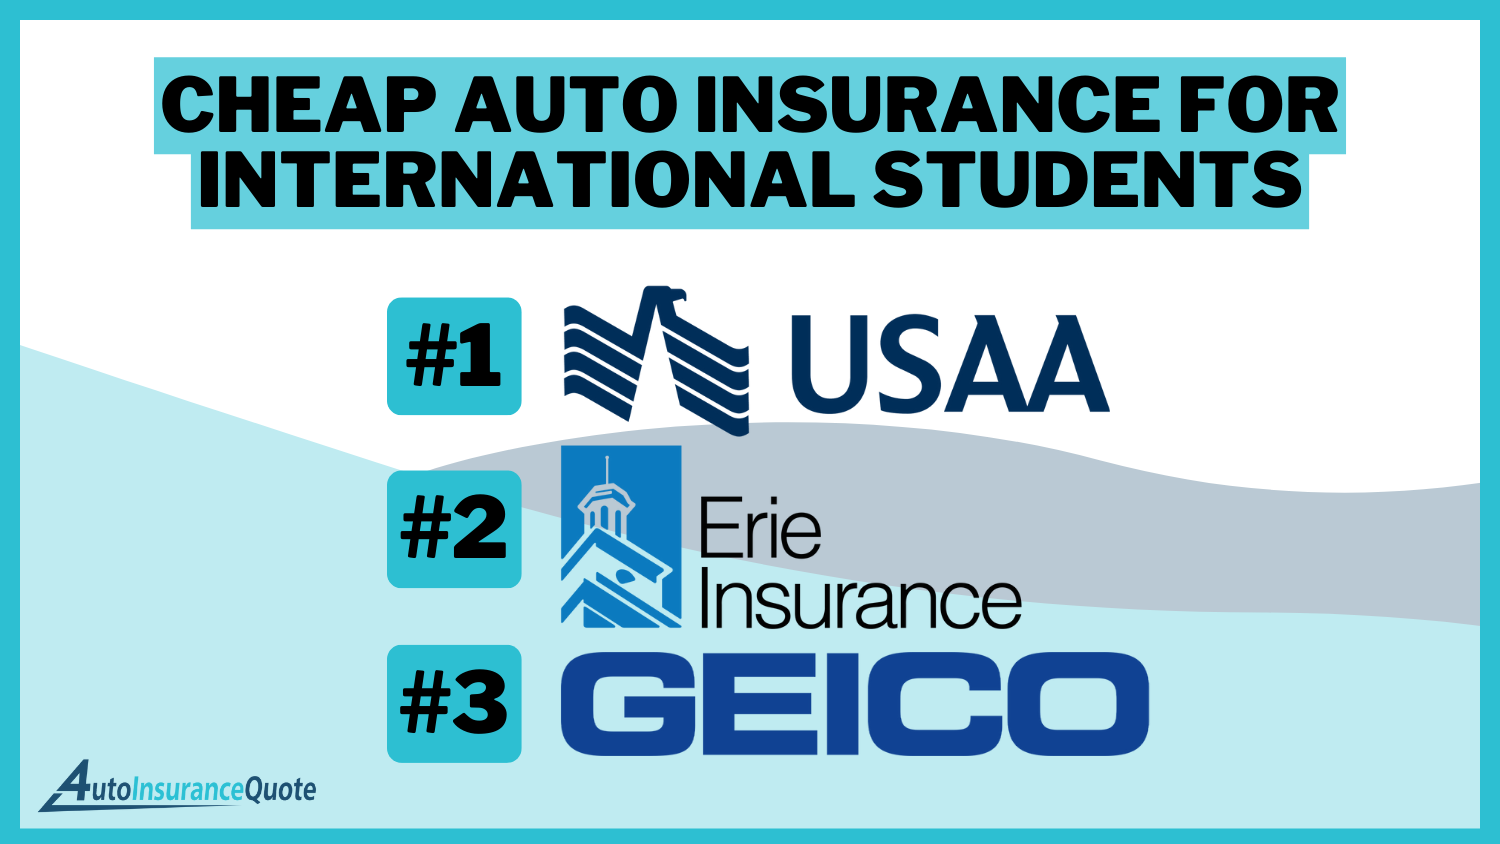 Cheap Auto Insurance for International Students: USAA, Erie, Geico